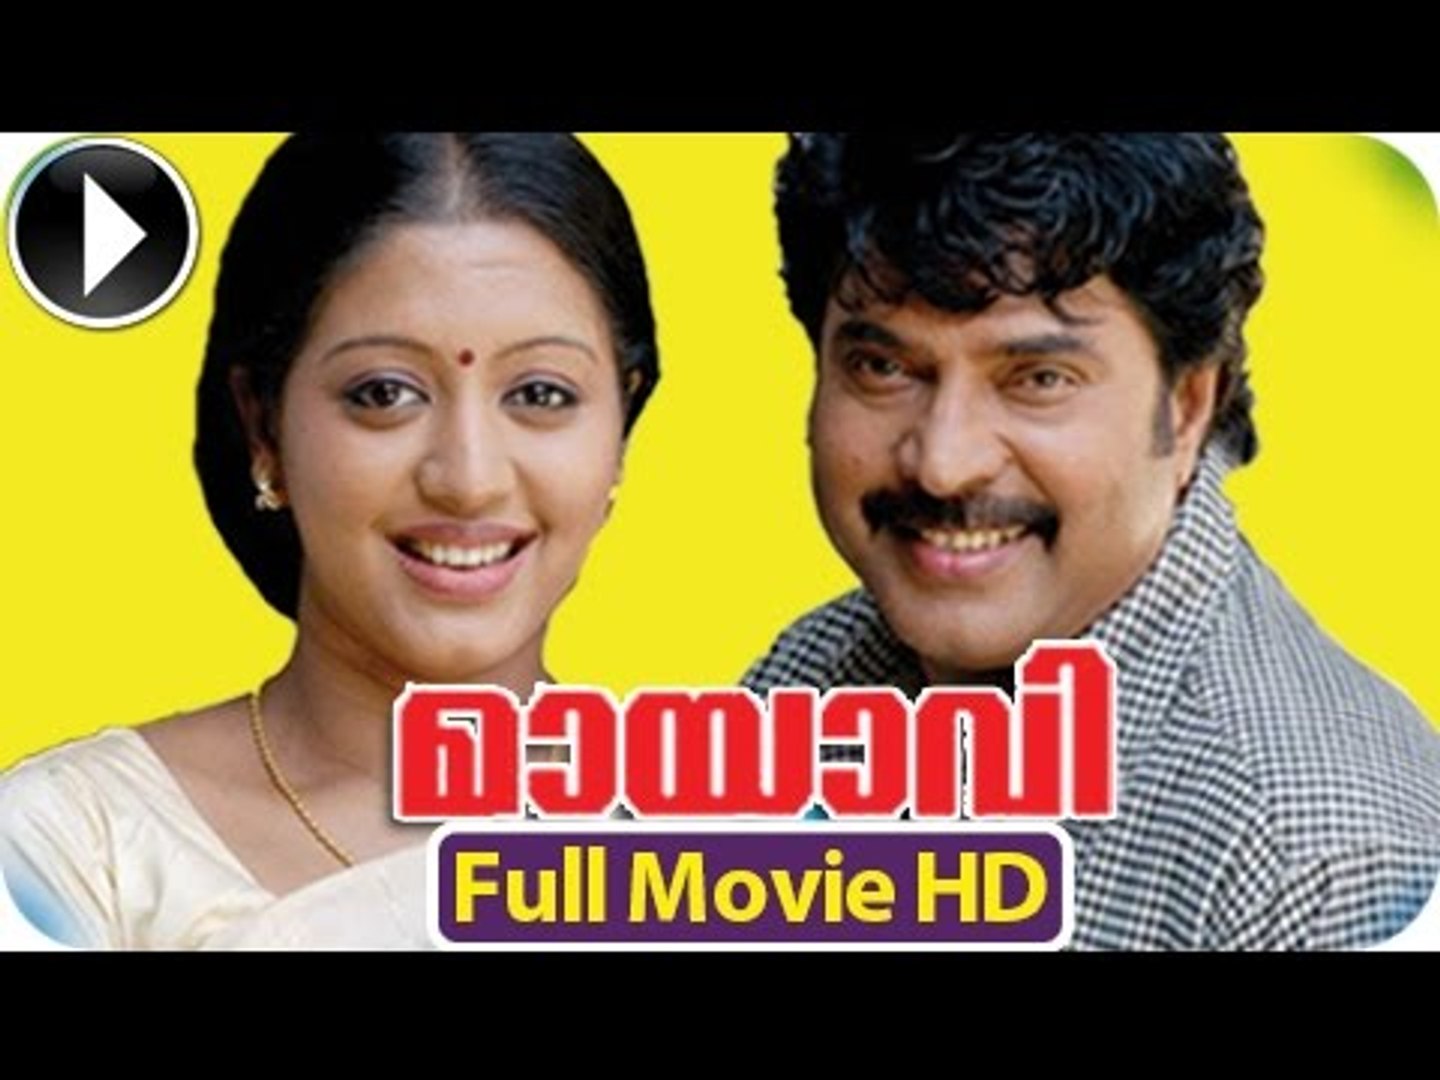 Best of Malayalam full movie download sites